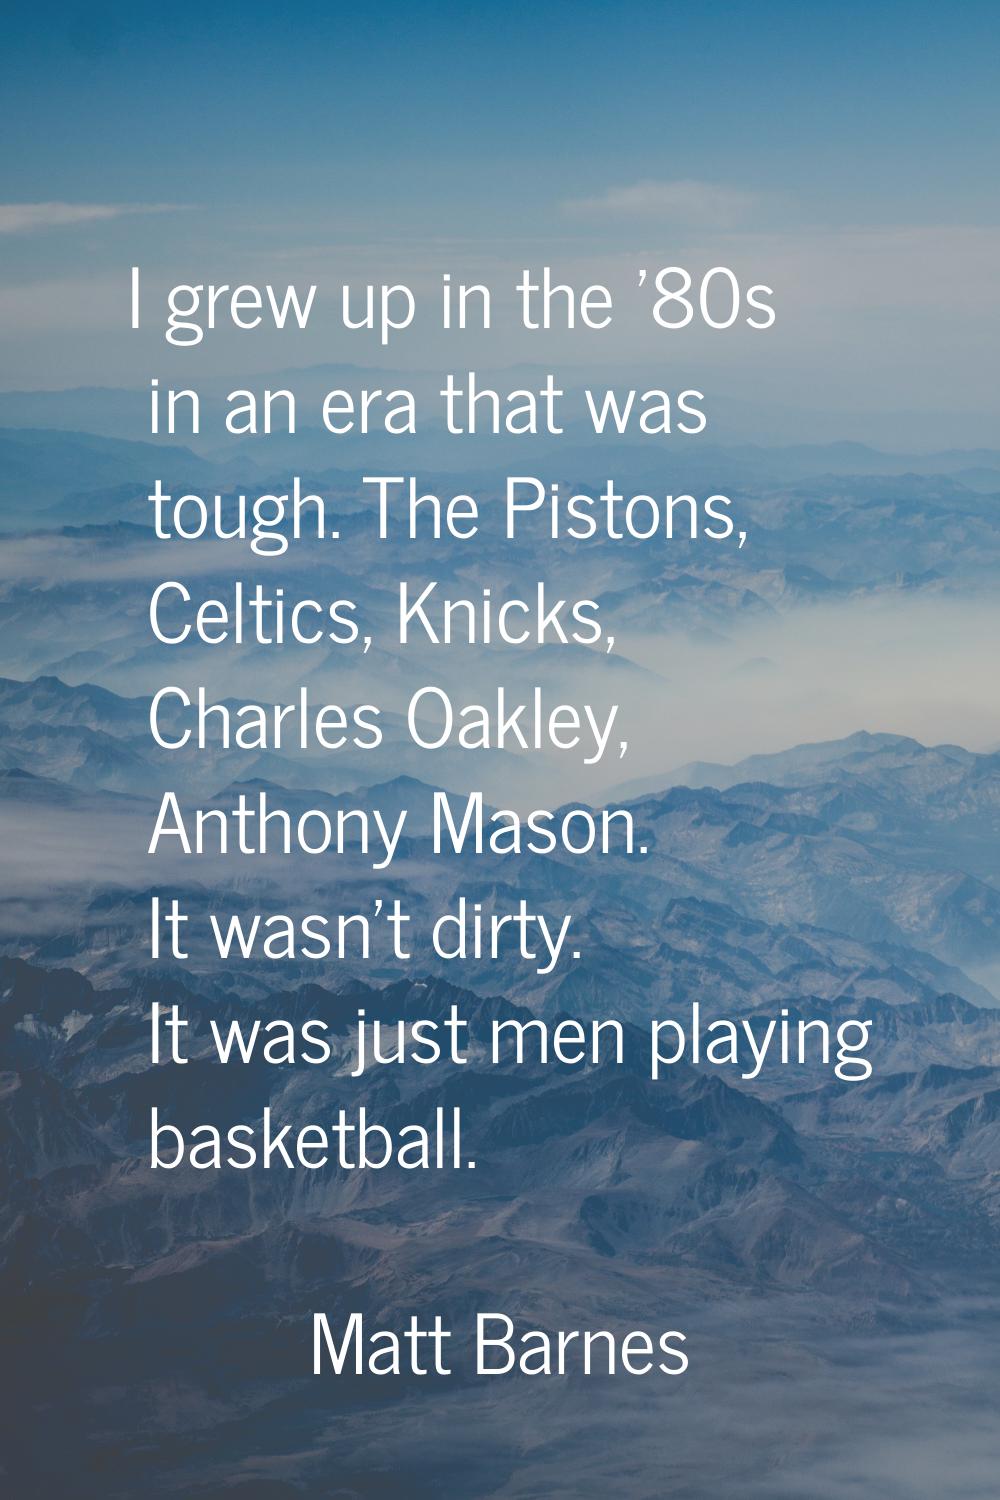 I grew up in the '80s in an era that was tough. The Pistons, Celtics, Knicks, Charles Oakley, Antho